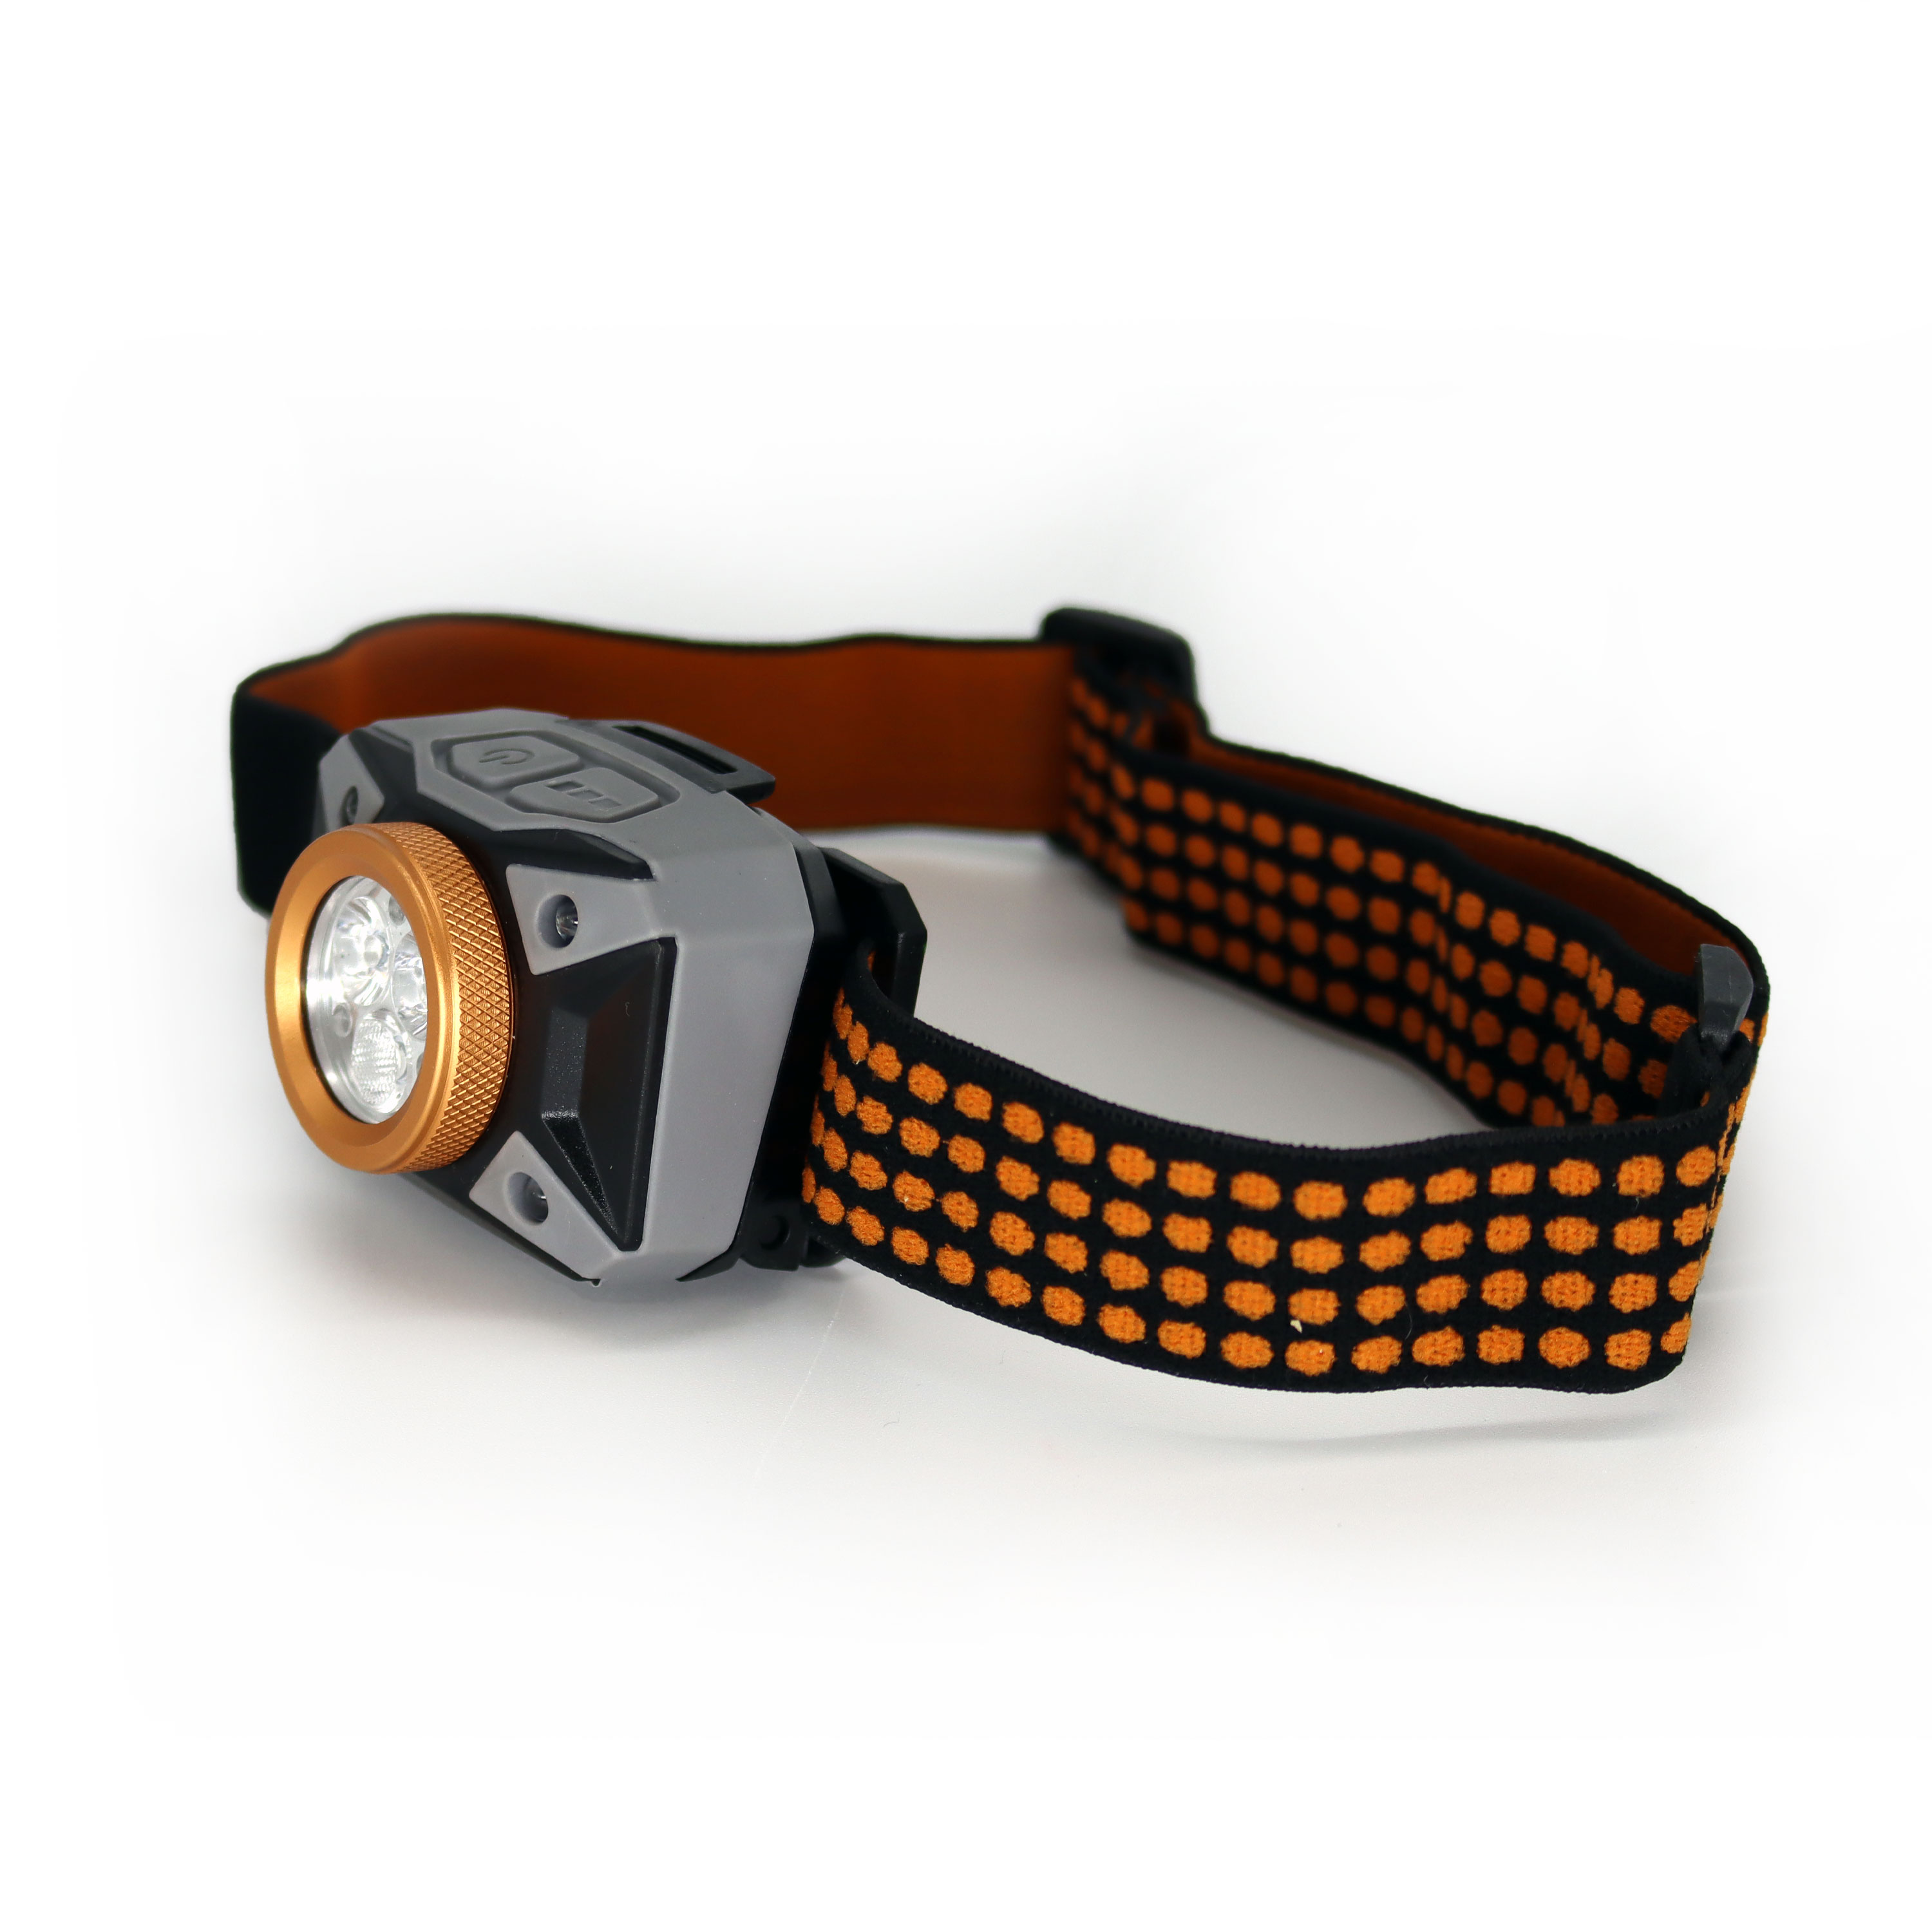 Lux-Pro 450-Lumen LED Headlamp (Battery Included) in the Headlamps